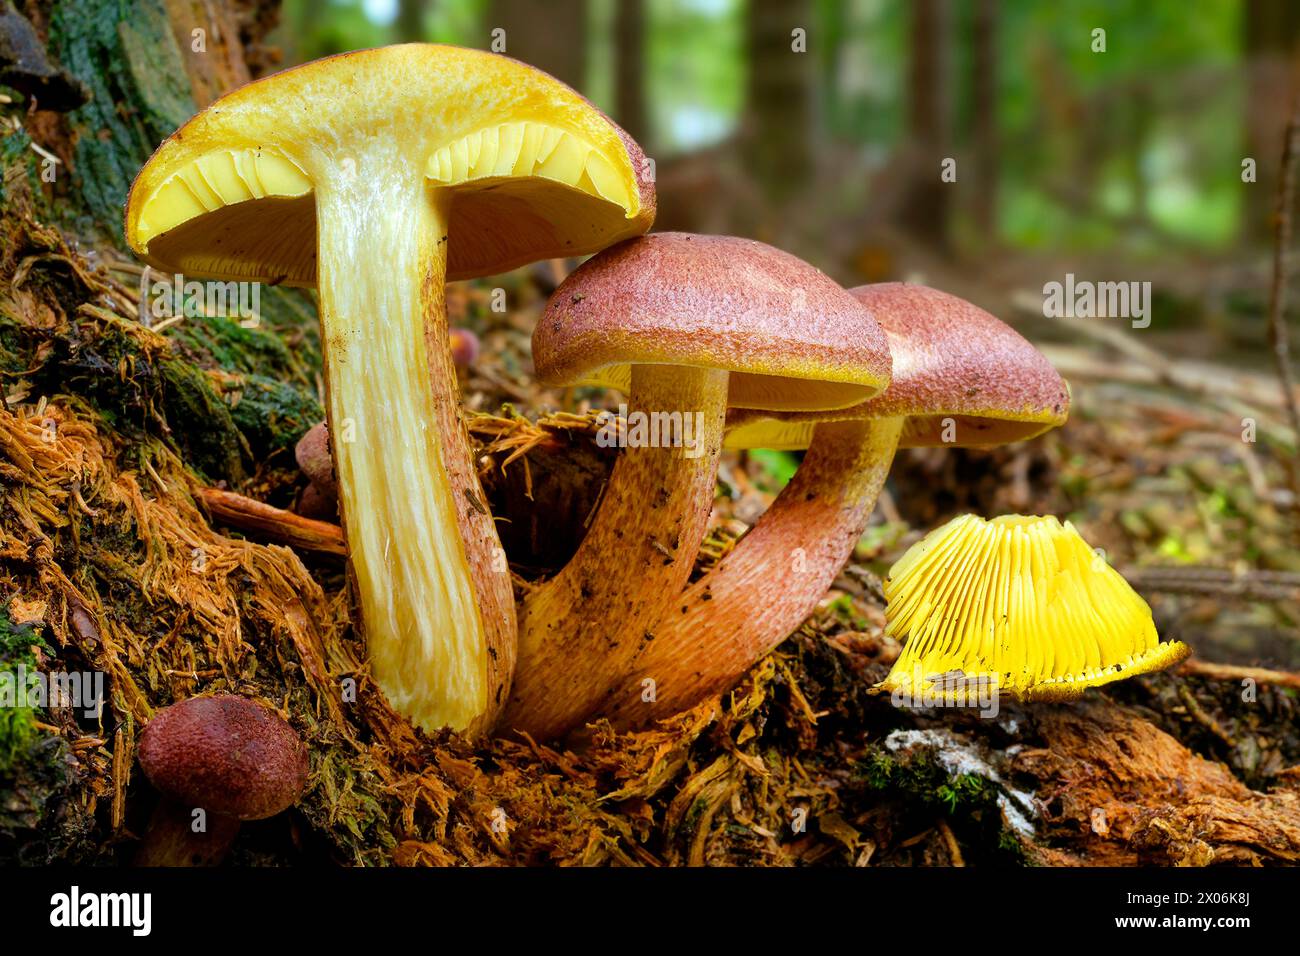 Plums and Custard, Red-haired agaric (Tricholomopsis rutilans, Tricholomopsis variegata, Tricholoma rutilans), red-haired agaric in coniferous forest, Stock Photo